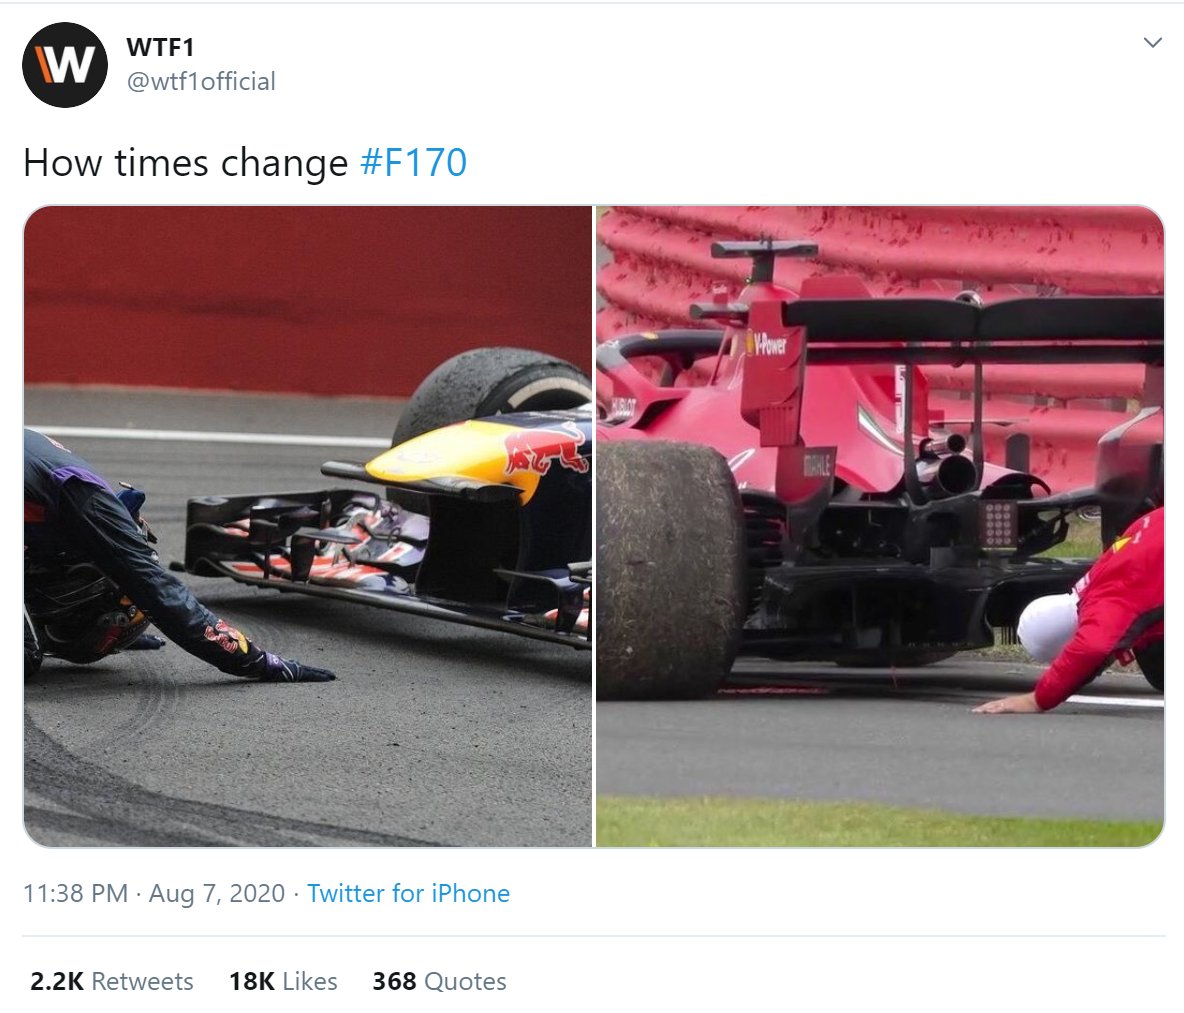 As some may believe, WTF1 is sometimes infamous for stealing content from others and claiming them as their own when a popular idea comes into many people's minds. Some recent examples incude some of  @FormuIaUno's popular tweets.